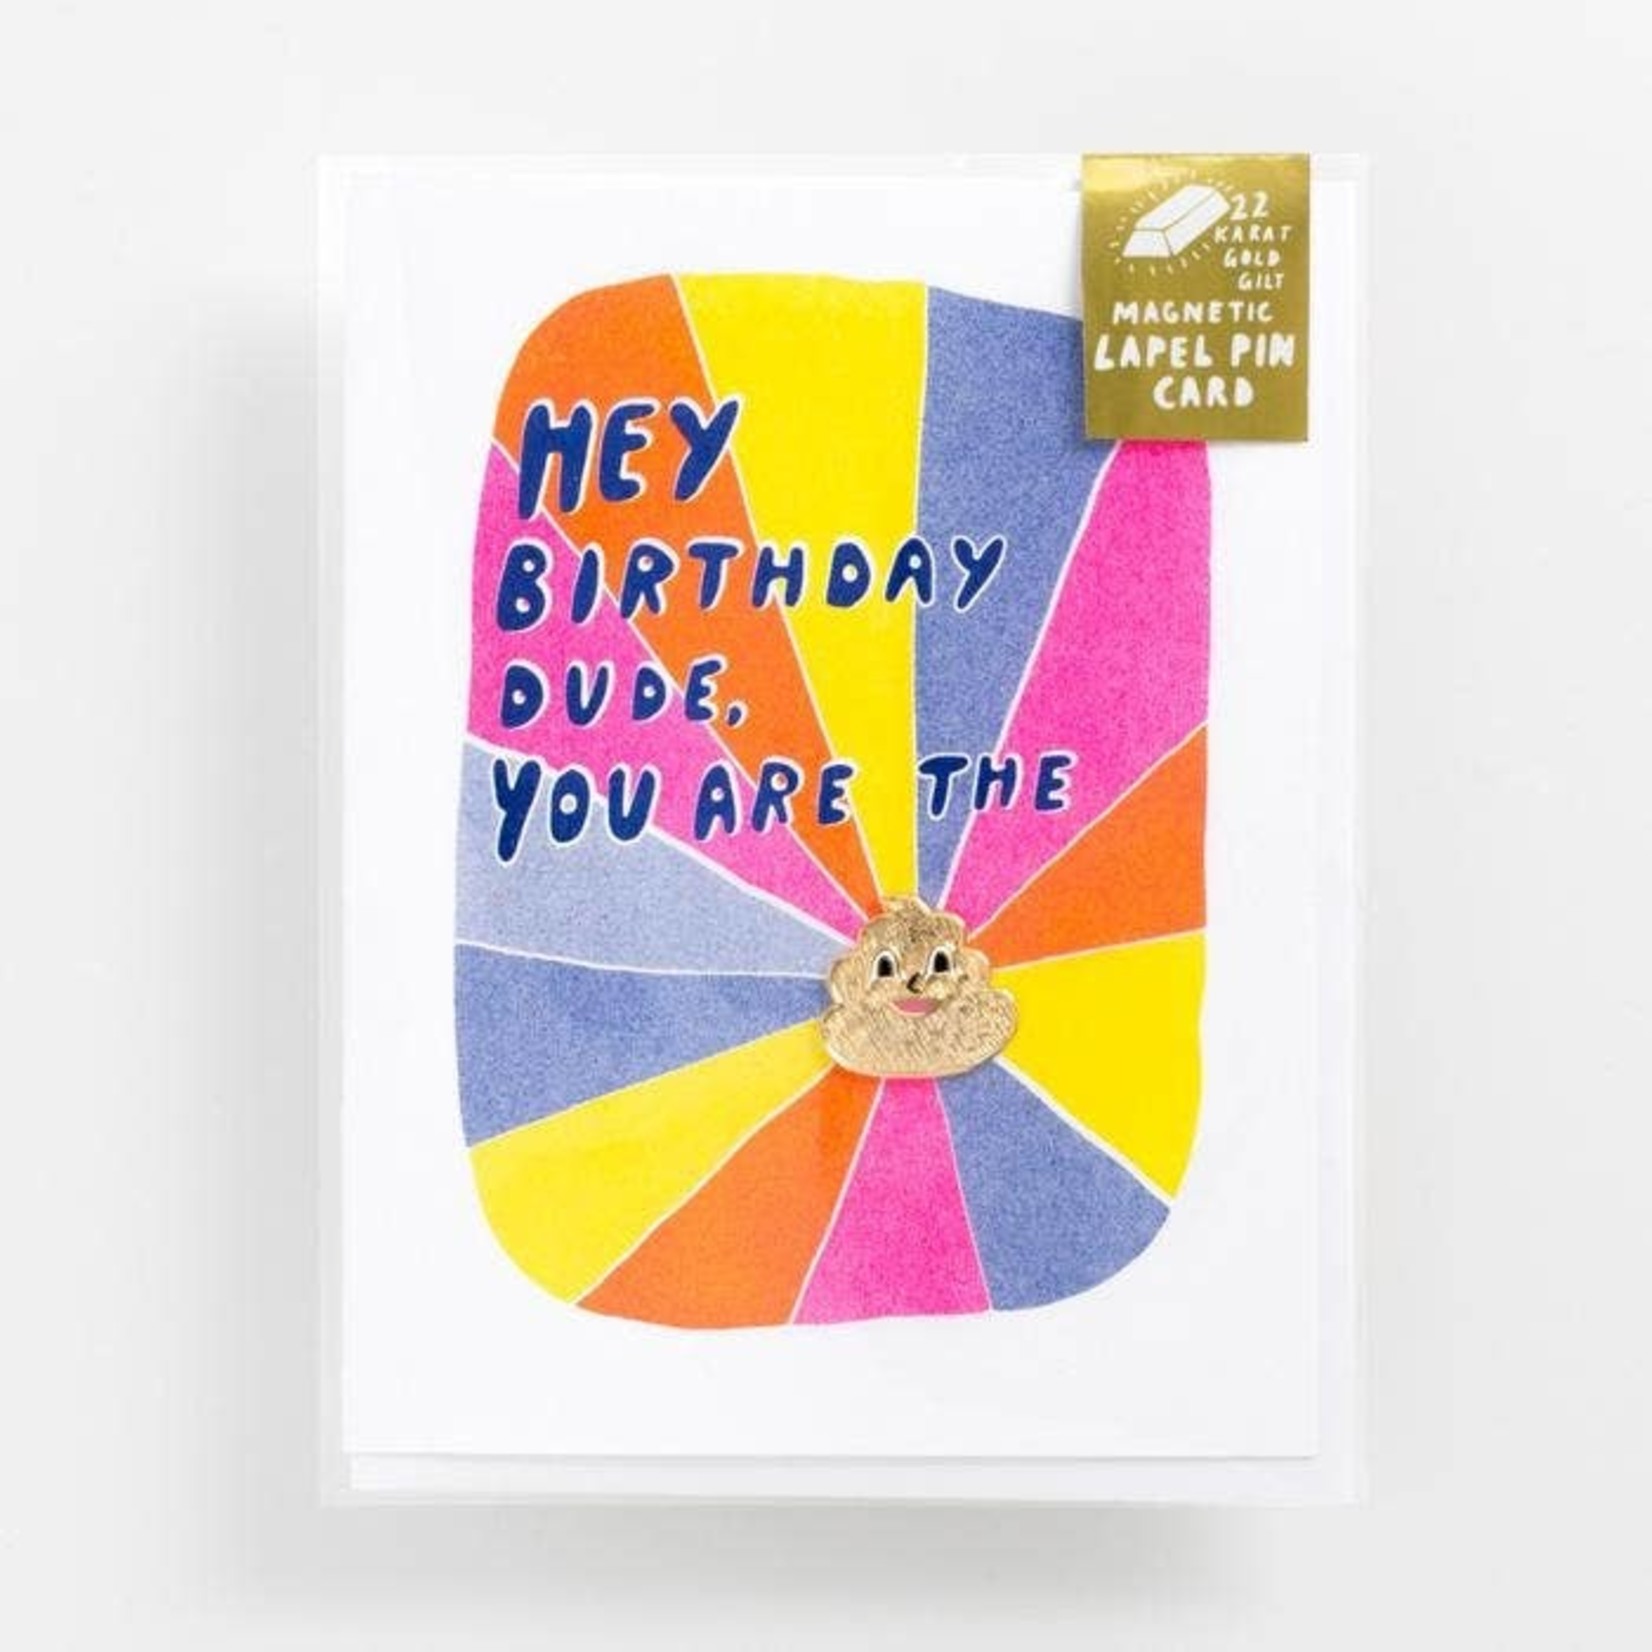 Yellow Owl Workshop Poo Pin And HBD You Are The Card